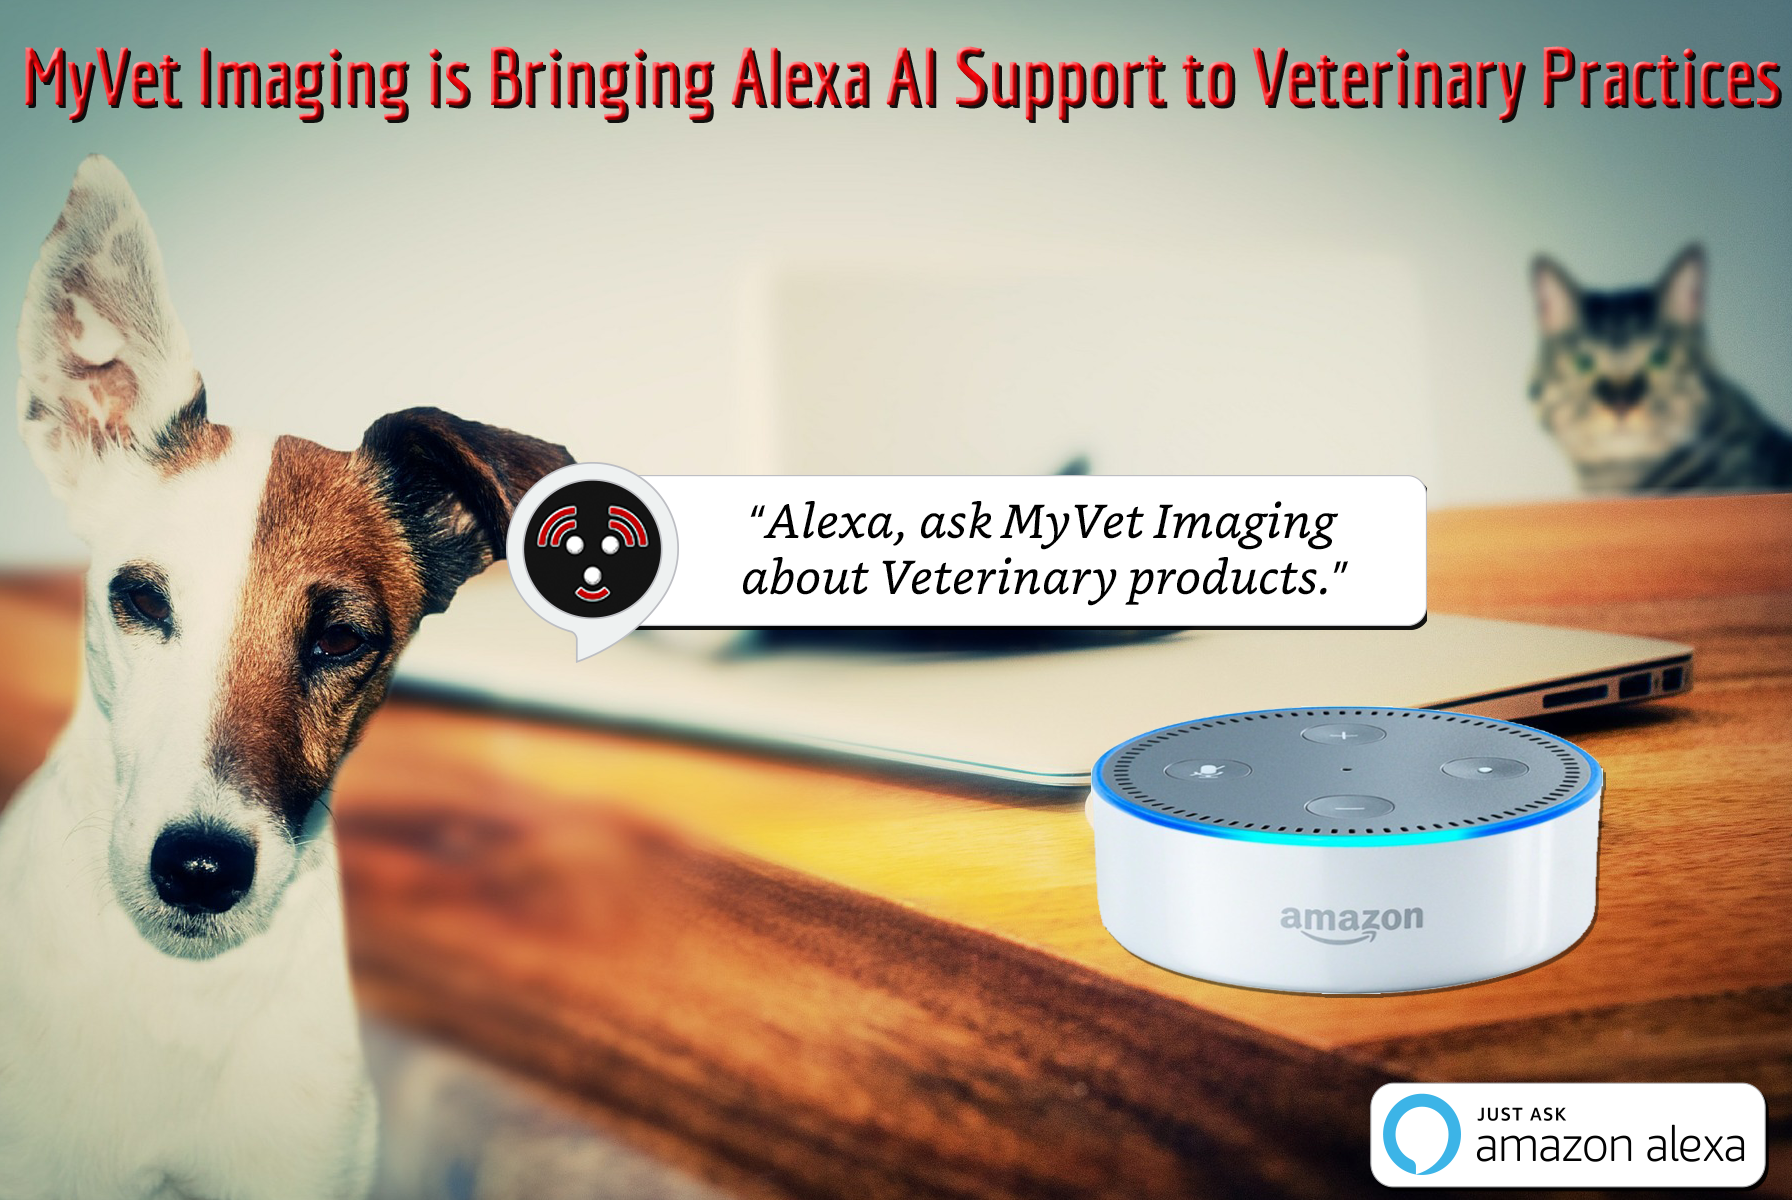 Marketing Materials for Completed Alexa Skill